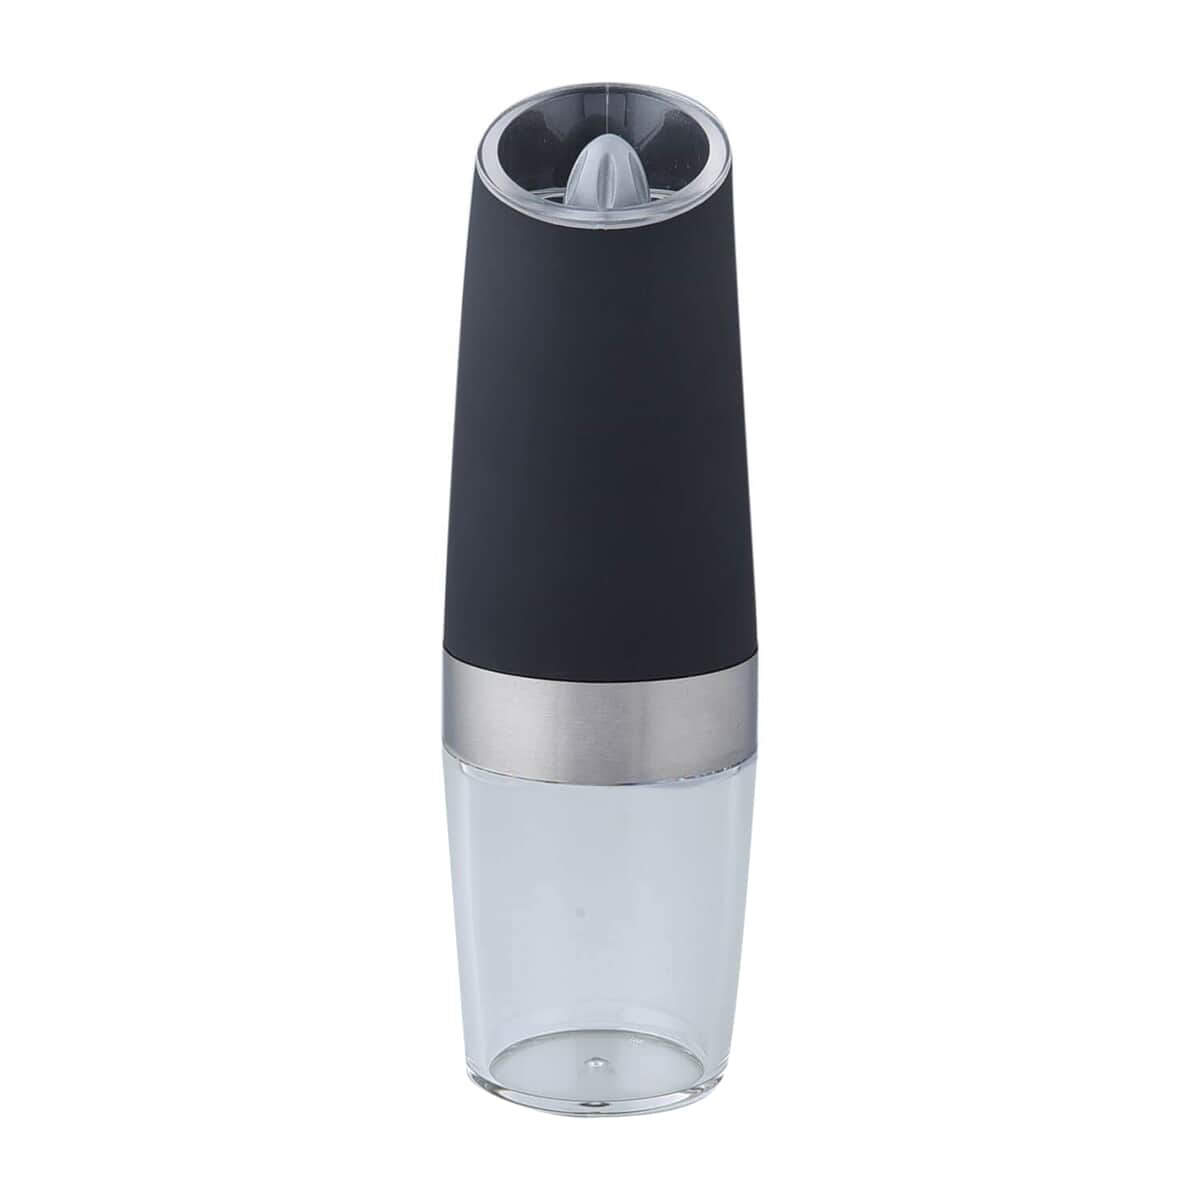 Gravity Electric Salt or Pepper Grinder Mill, Battery Operated Stainless Steel Mill with Light, Automatic One Handed Operation, Electronic Adjustable Shakers (6XAAA Battery Not included) image number 0